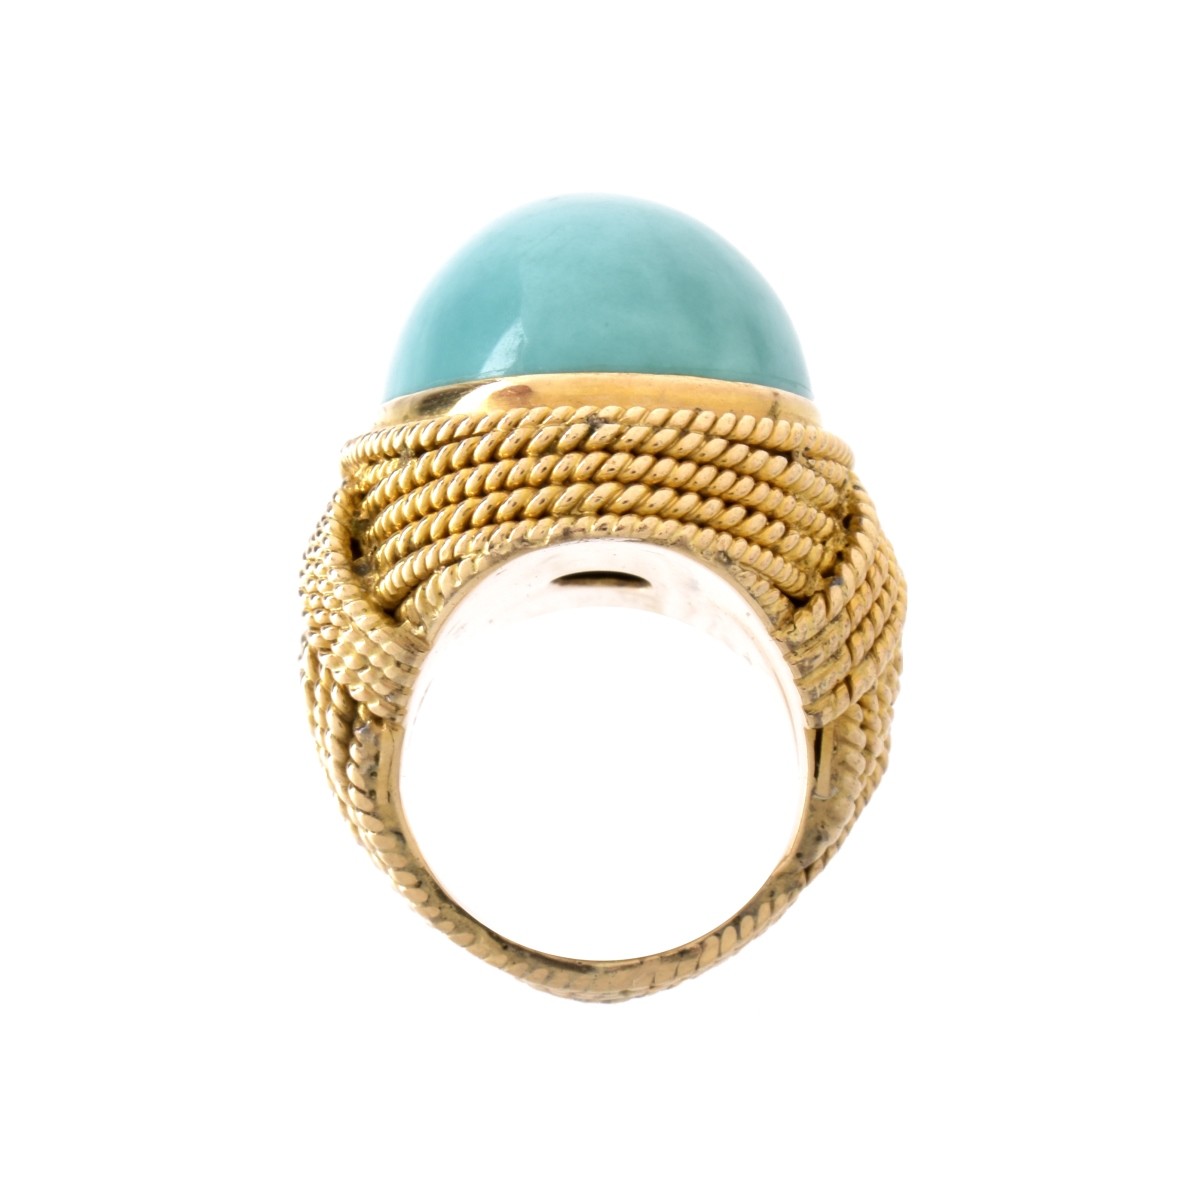 1960s Turquoise and 14K Ring